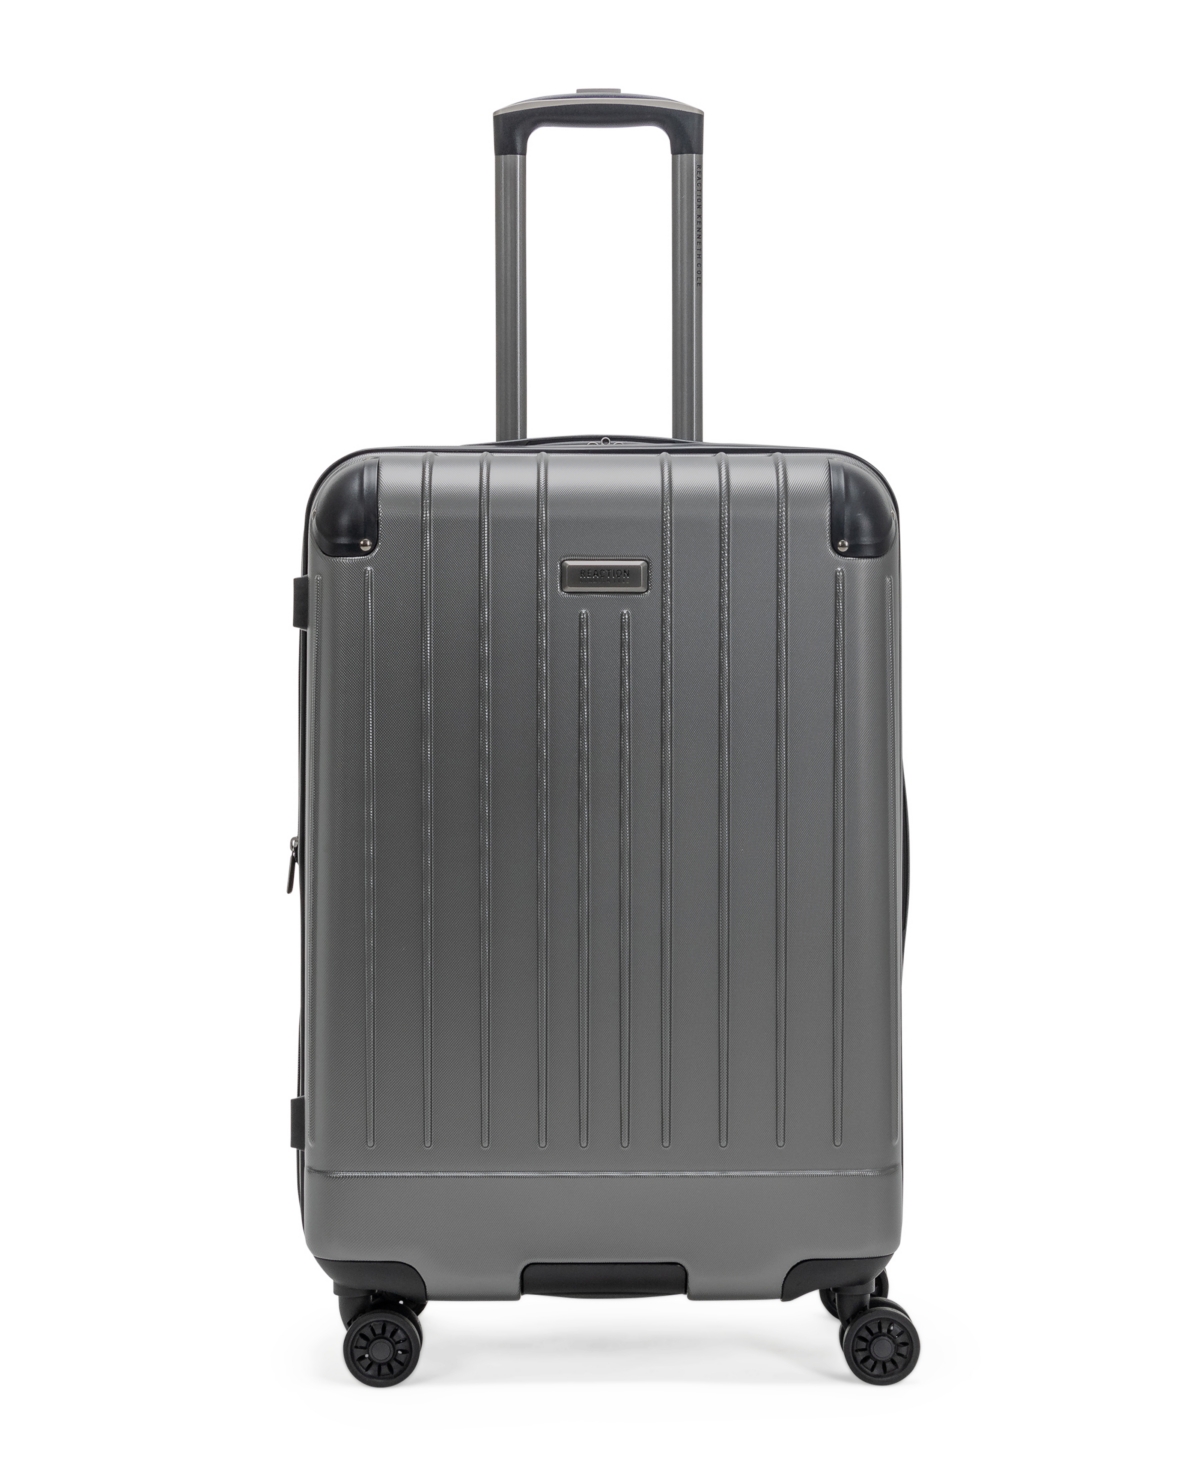 Flying Axis 24" Hardside Expandable Checked Luggage - Dream Blue